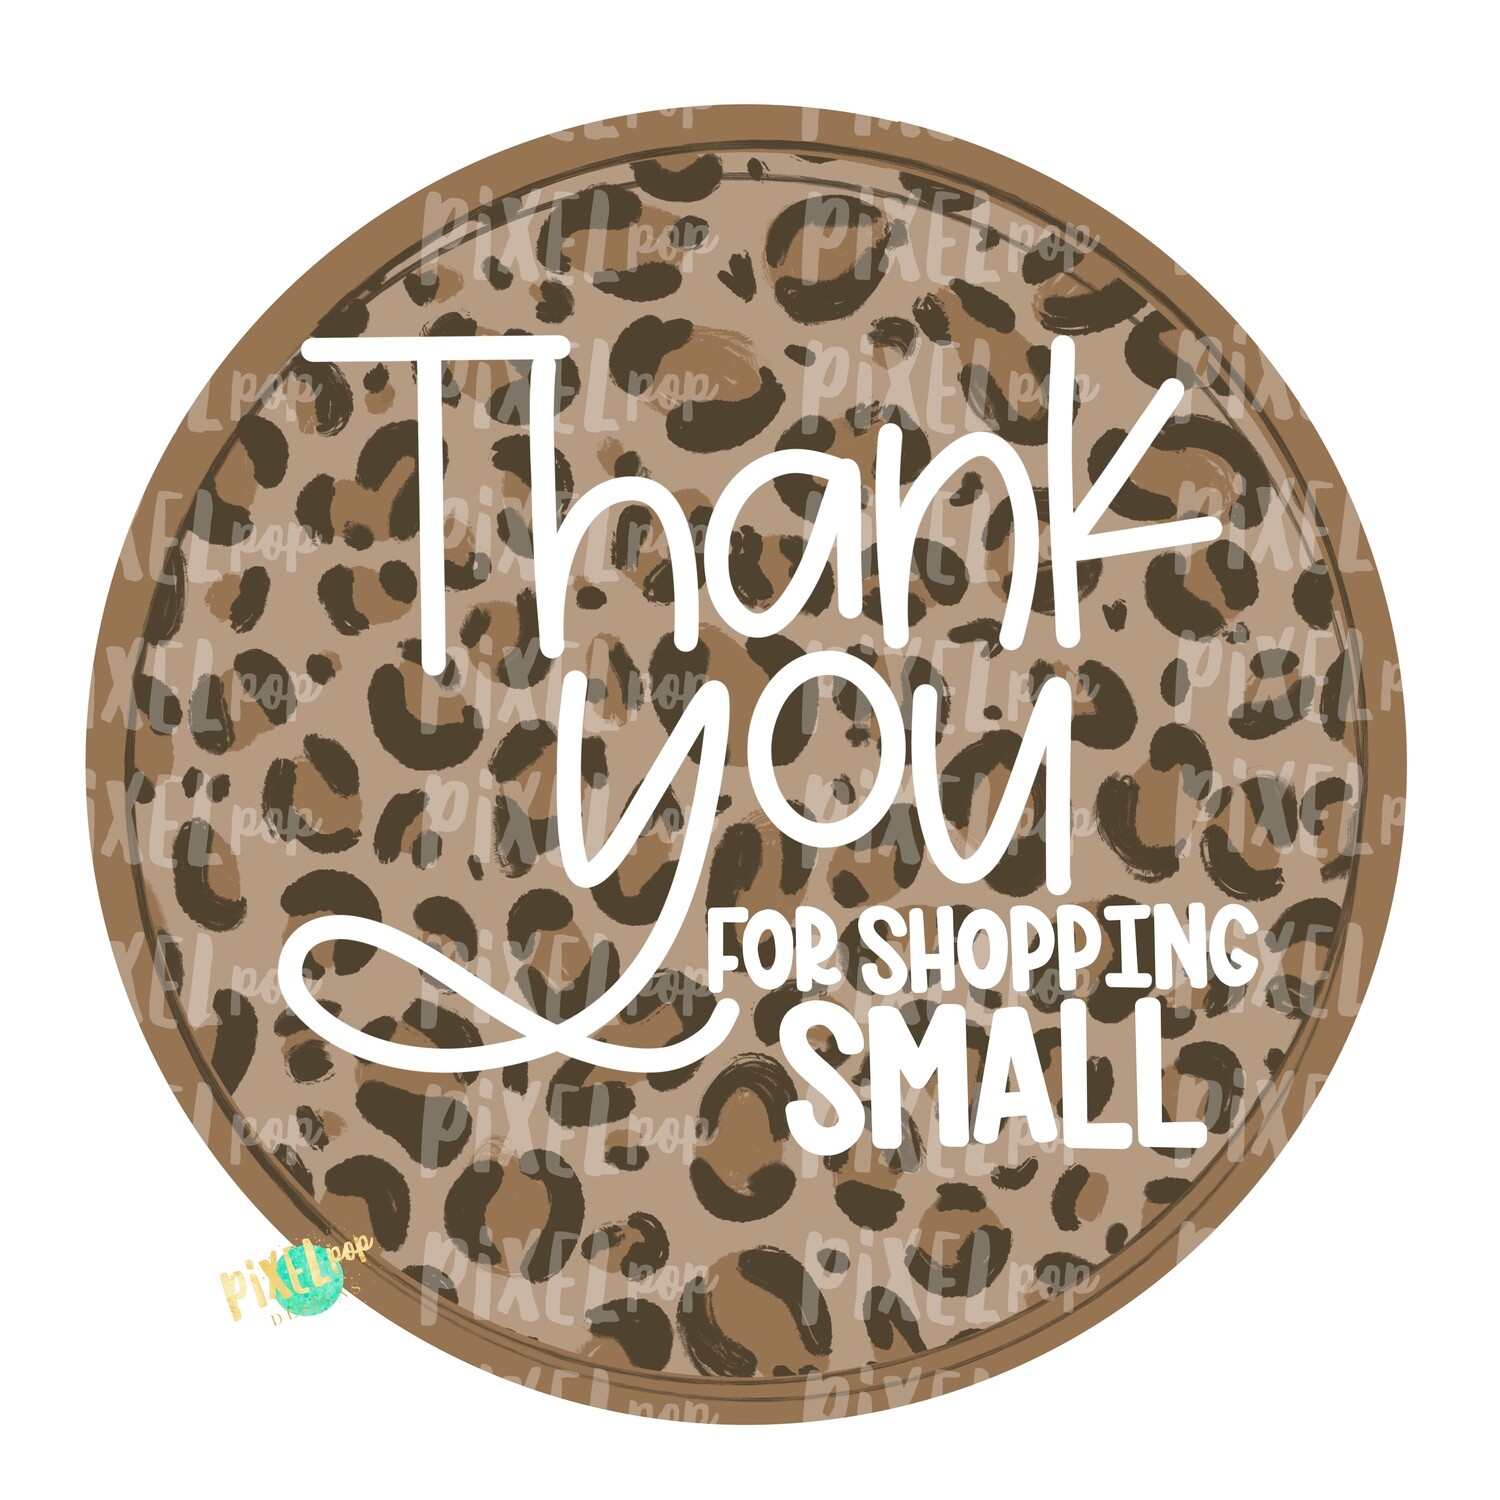 Thank You for Shopping Small Circle Leopard PNG | Business Clip | Small Business Marketing Image | Small Business Sticker Art | Business Art